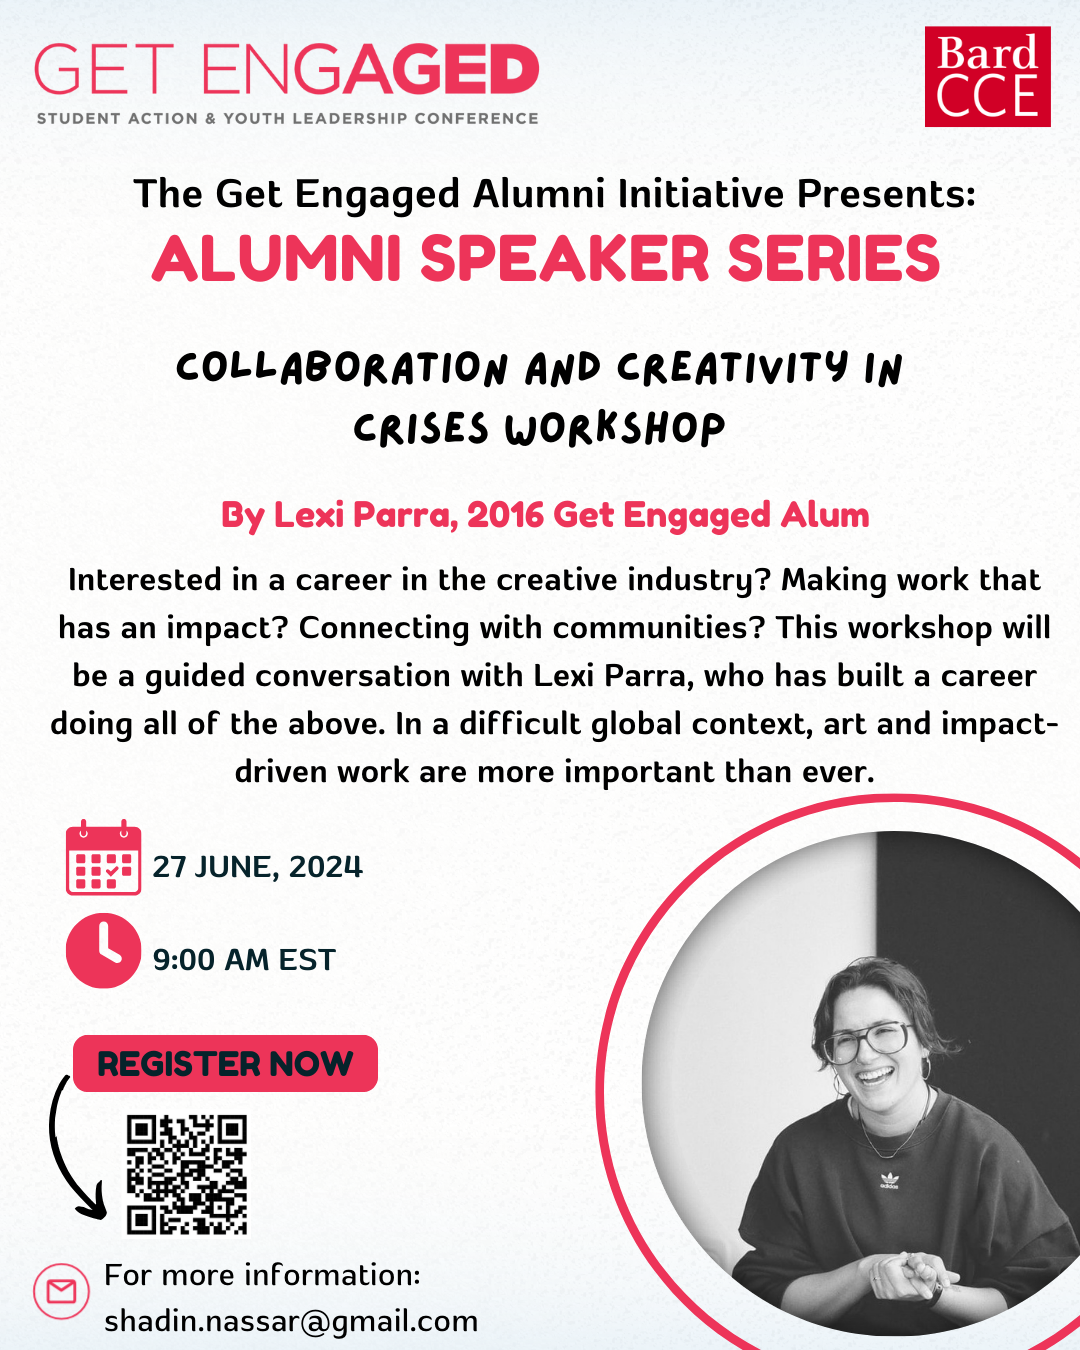 Get Engaged Alumni Speaker Series: &quot;Collaboration and Creativity in Crises&quot;